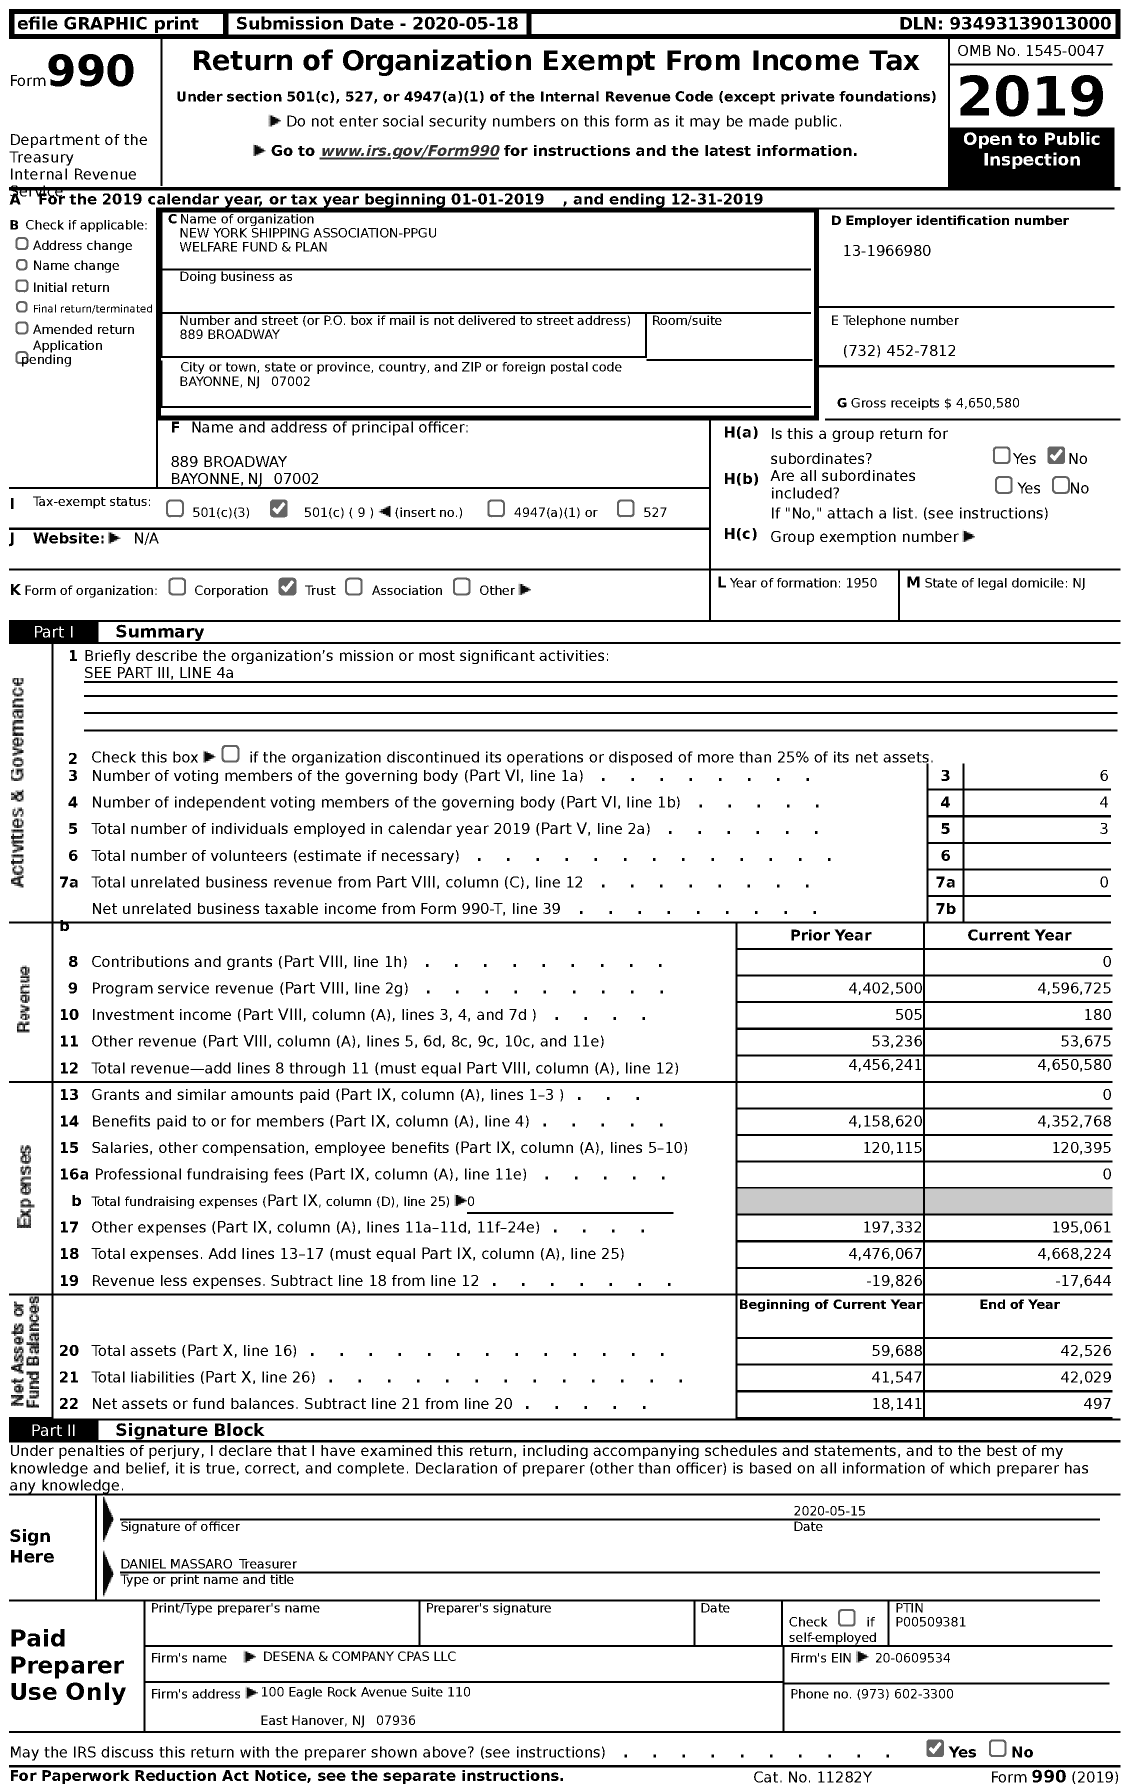 Image of first page of 2019 Form 990 for New York Shipping Association-Ppgu Welfare Fund and Plan